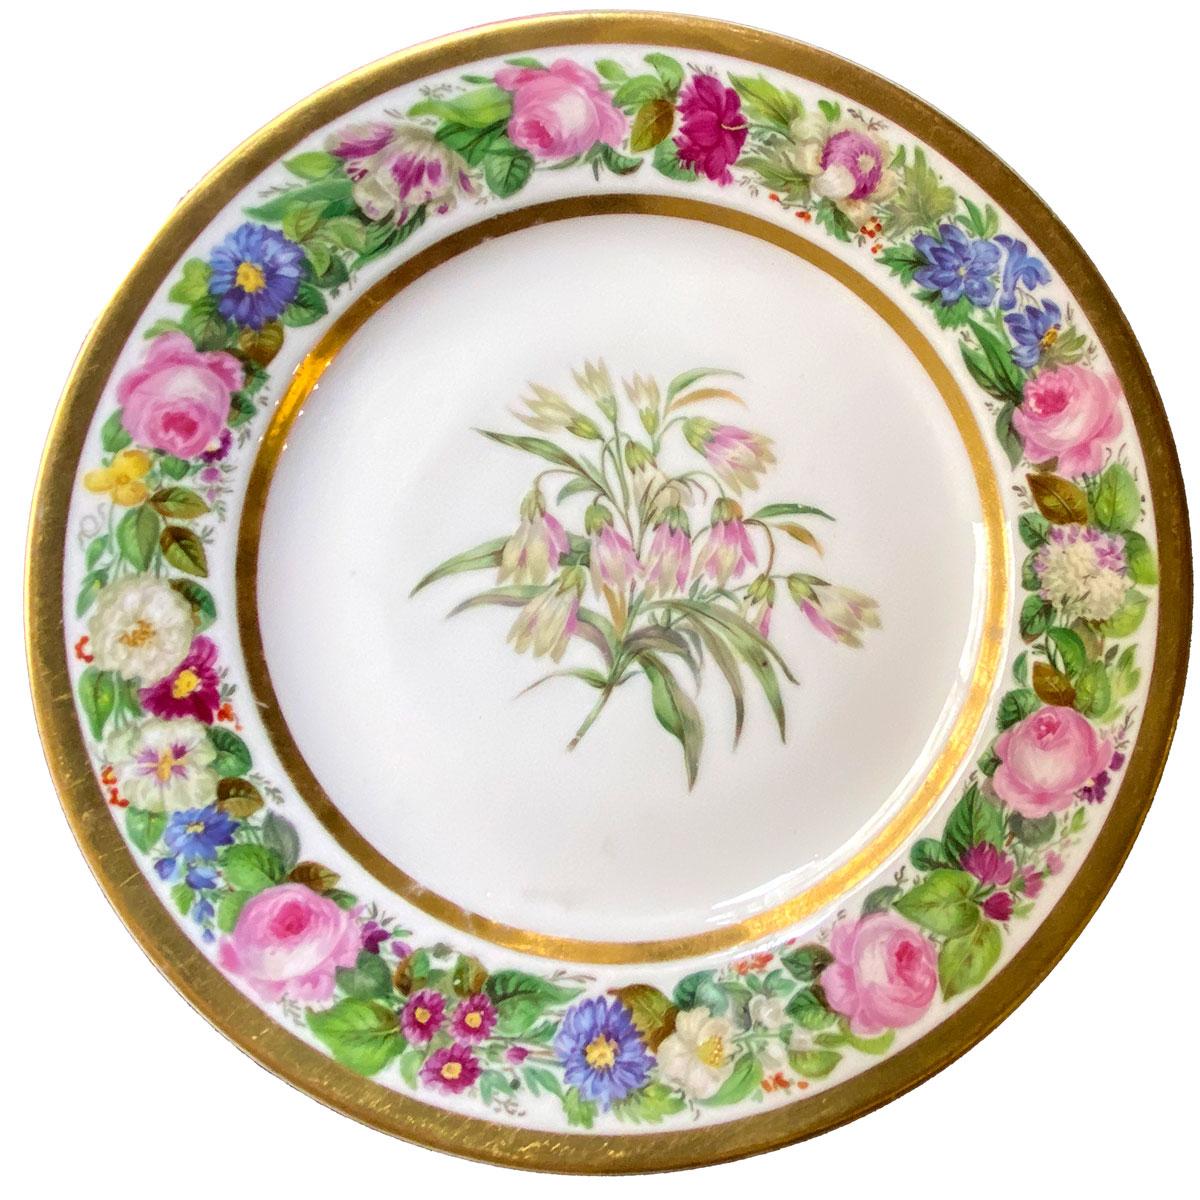 Set of 6 very rare plates in hand-painted and gilt porcelain with flowery decoration. Each plate is decorated with a specific flower: narcissus, bindweed, poppy, daisy, sweet pea, and balsam. Each one is framed by a fantastic swag of flowers very